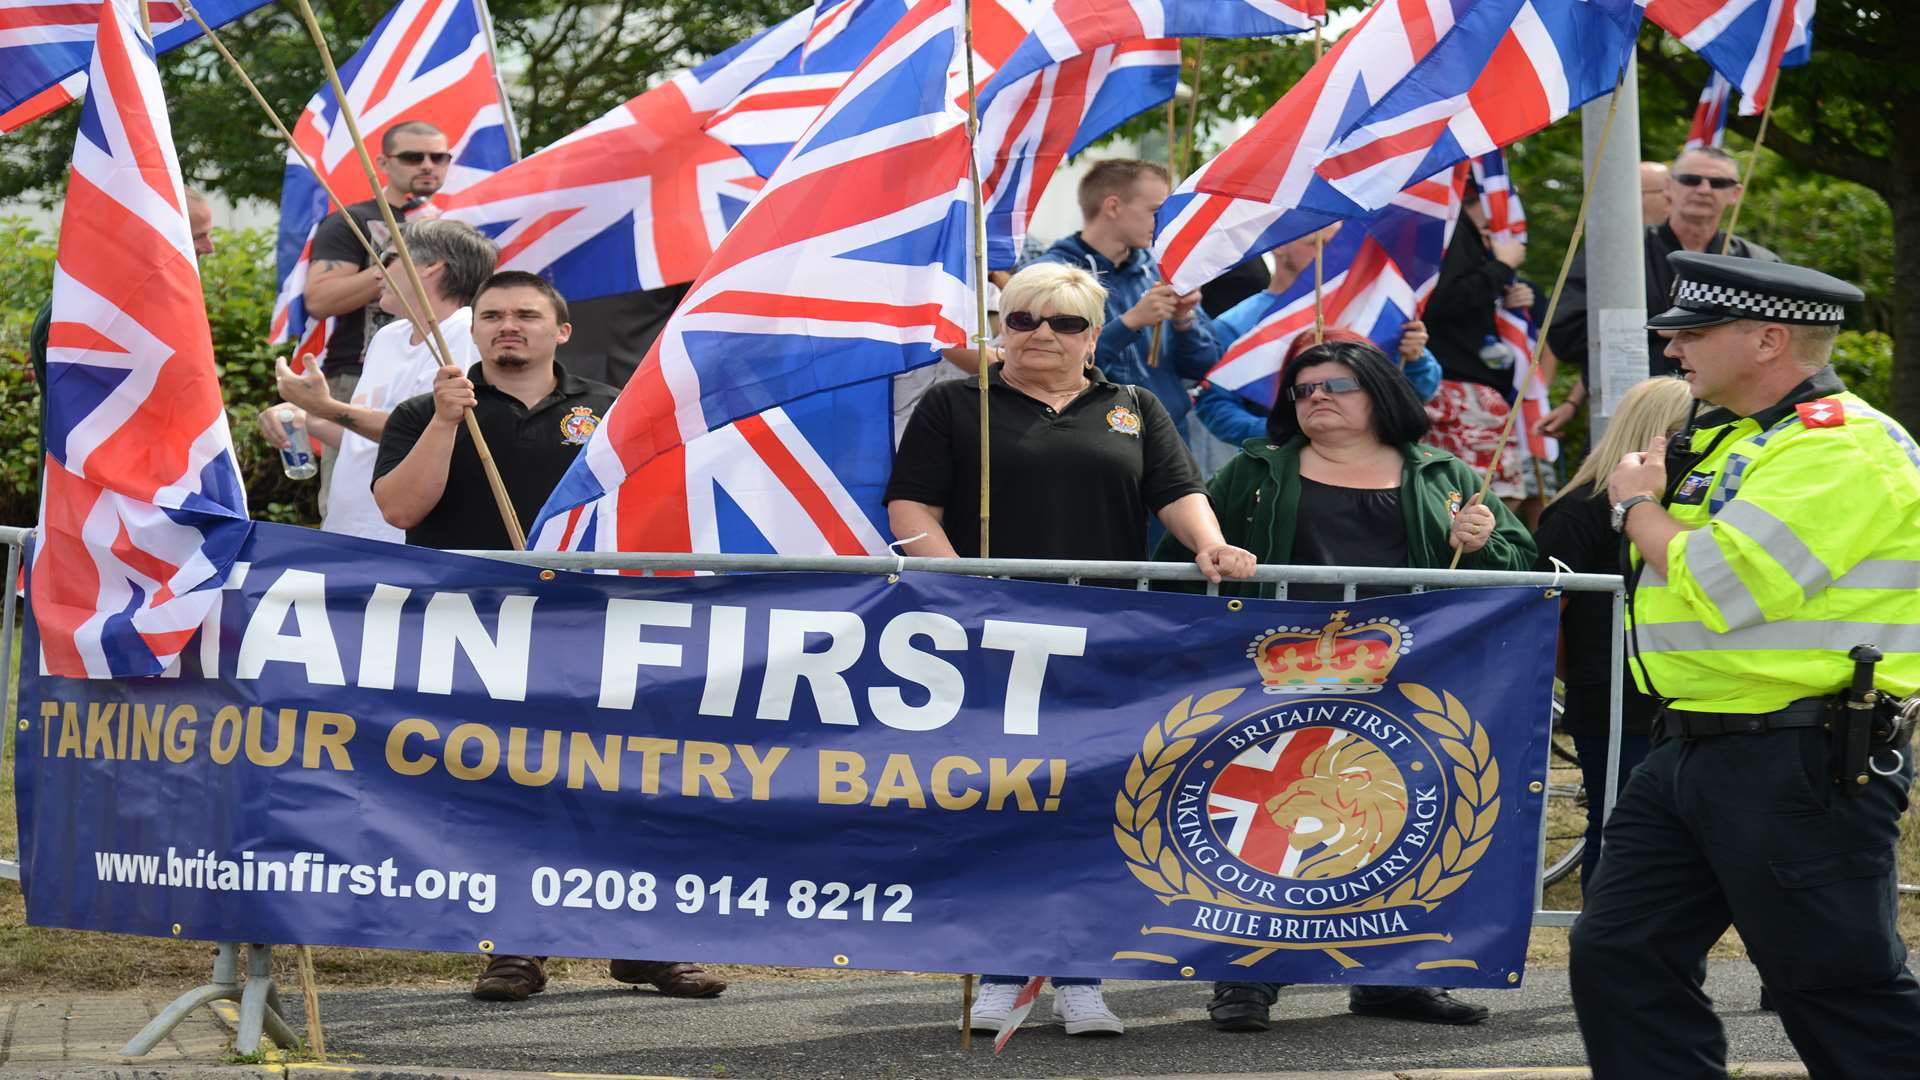 Britain First protesters flew the Union flag